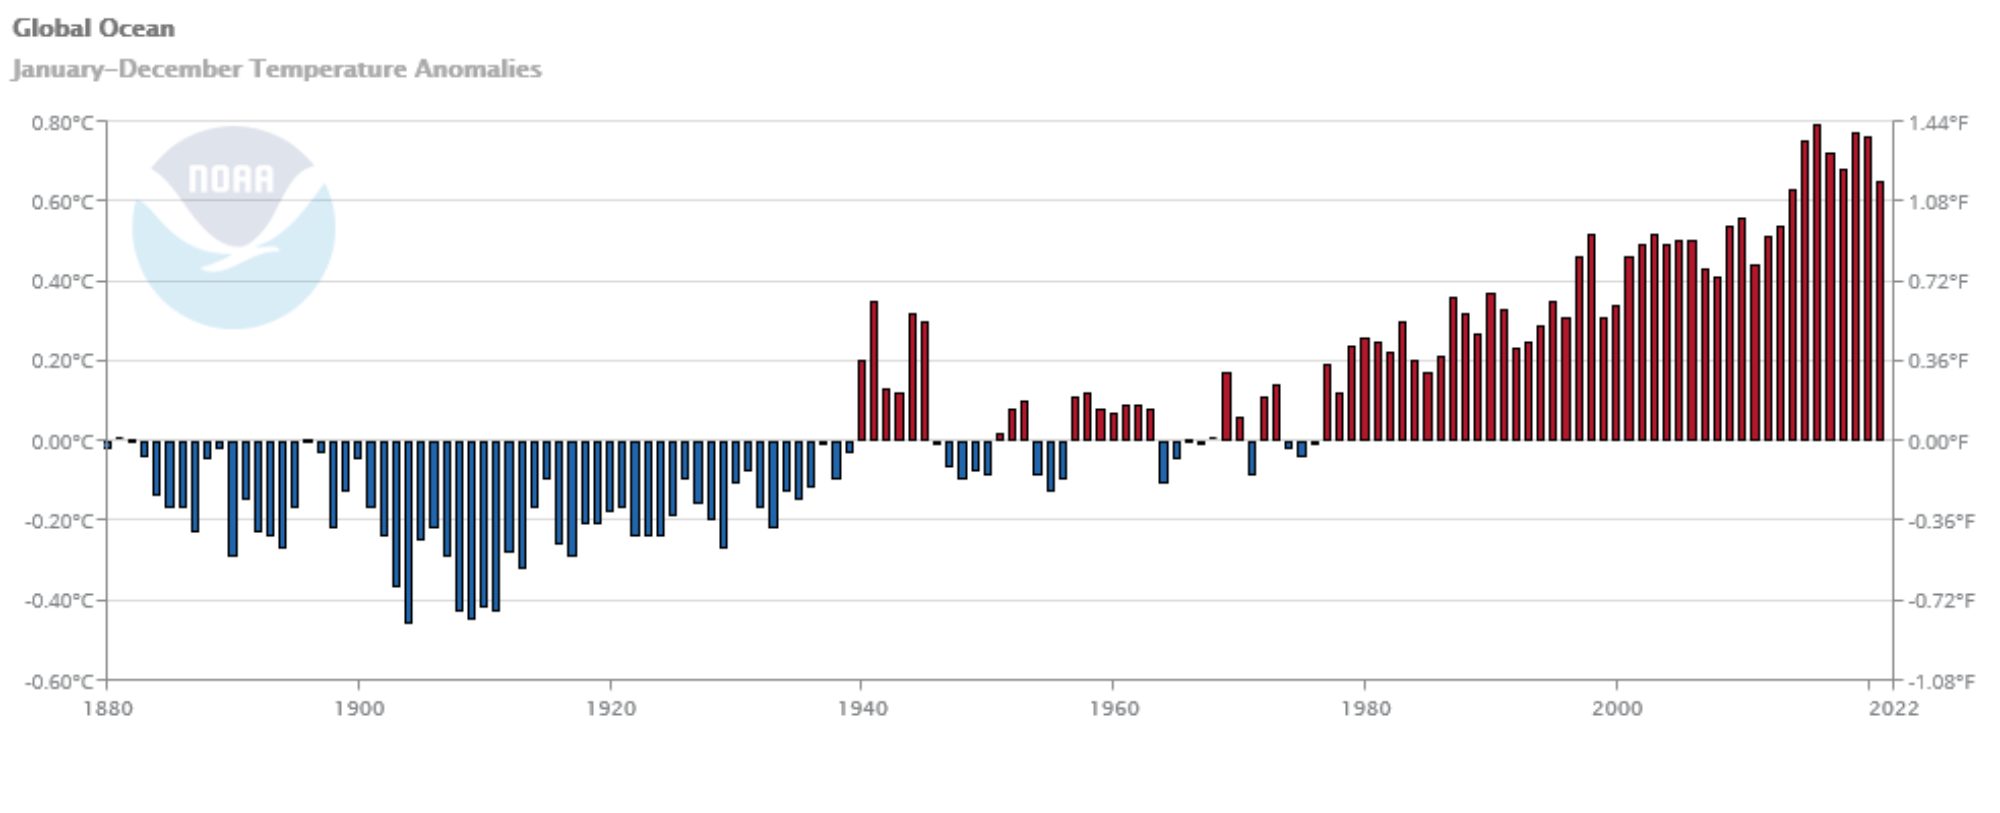 Graph of the surface temperature of the ocean from 1880 to 2021, showing an increasing trend.